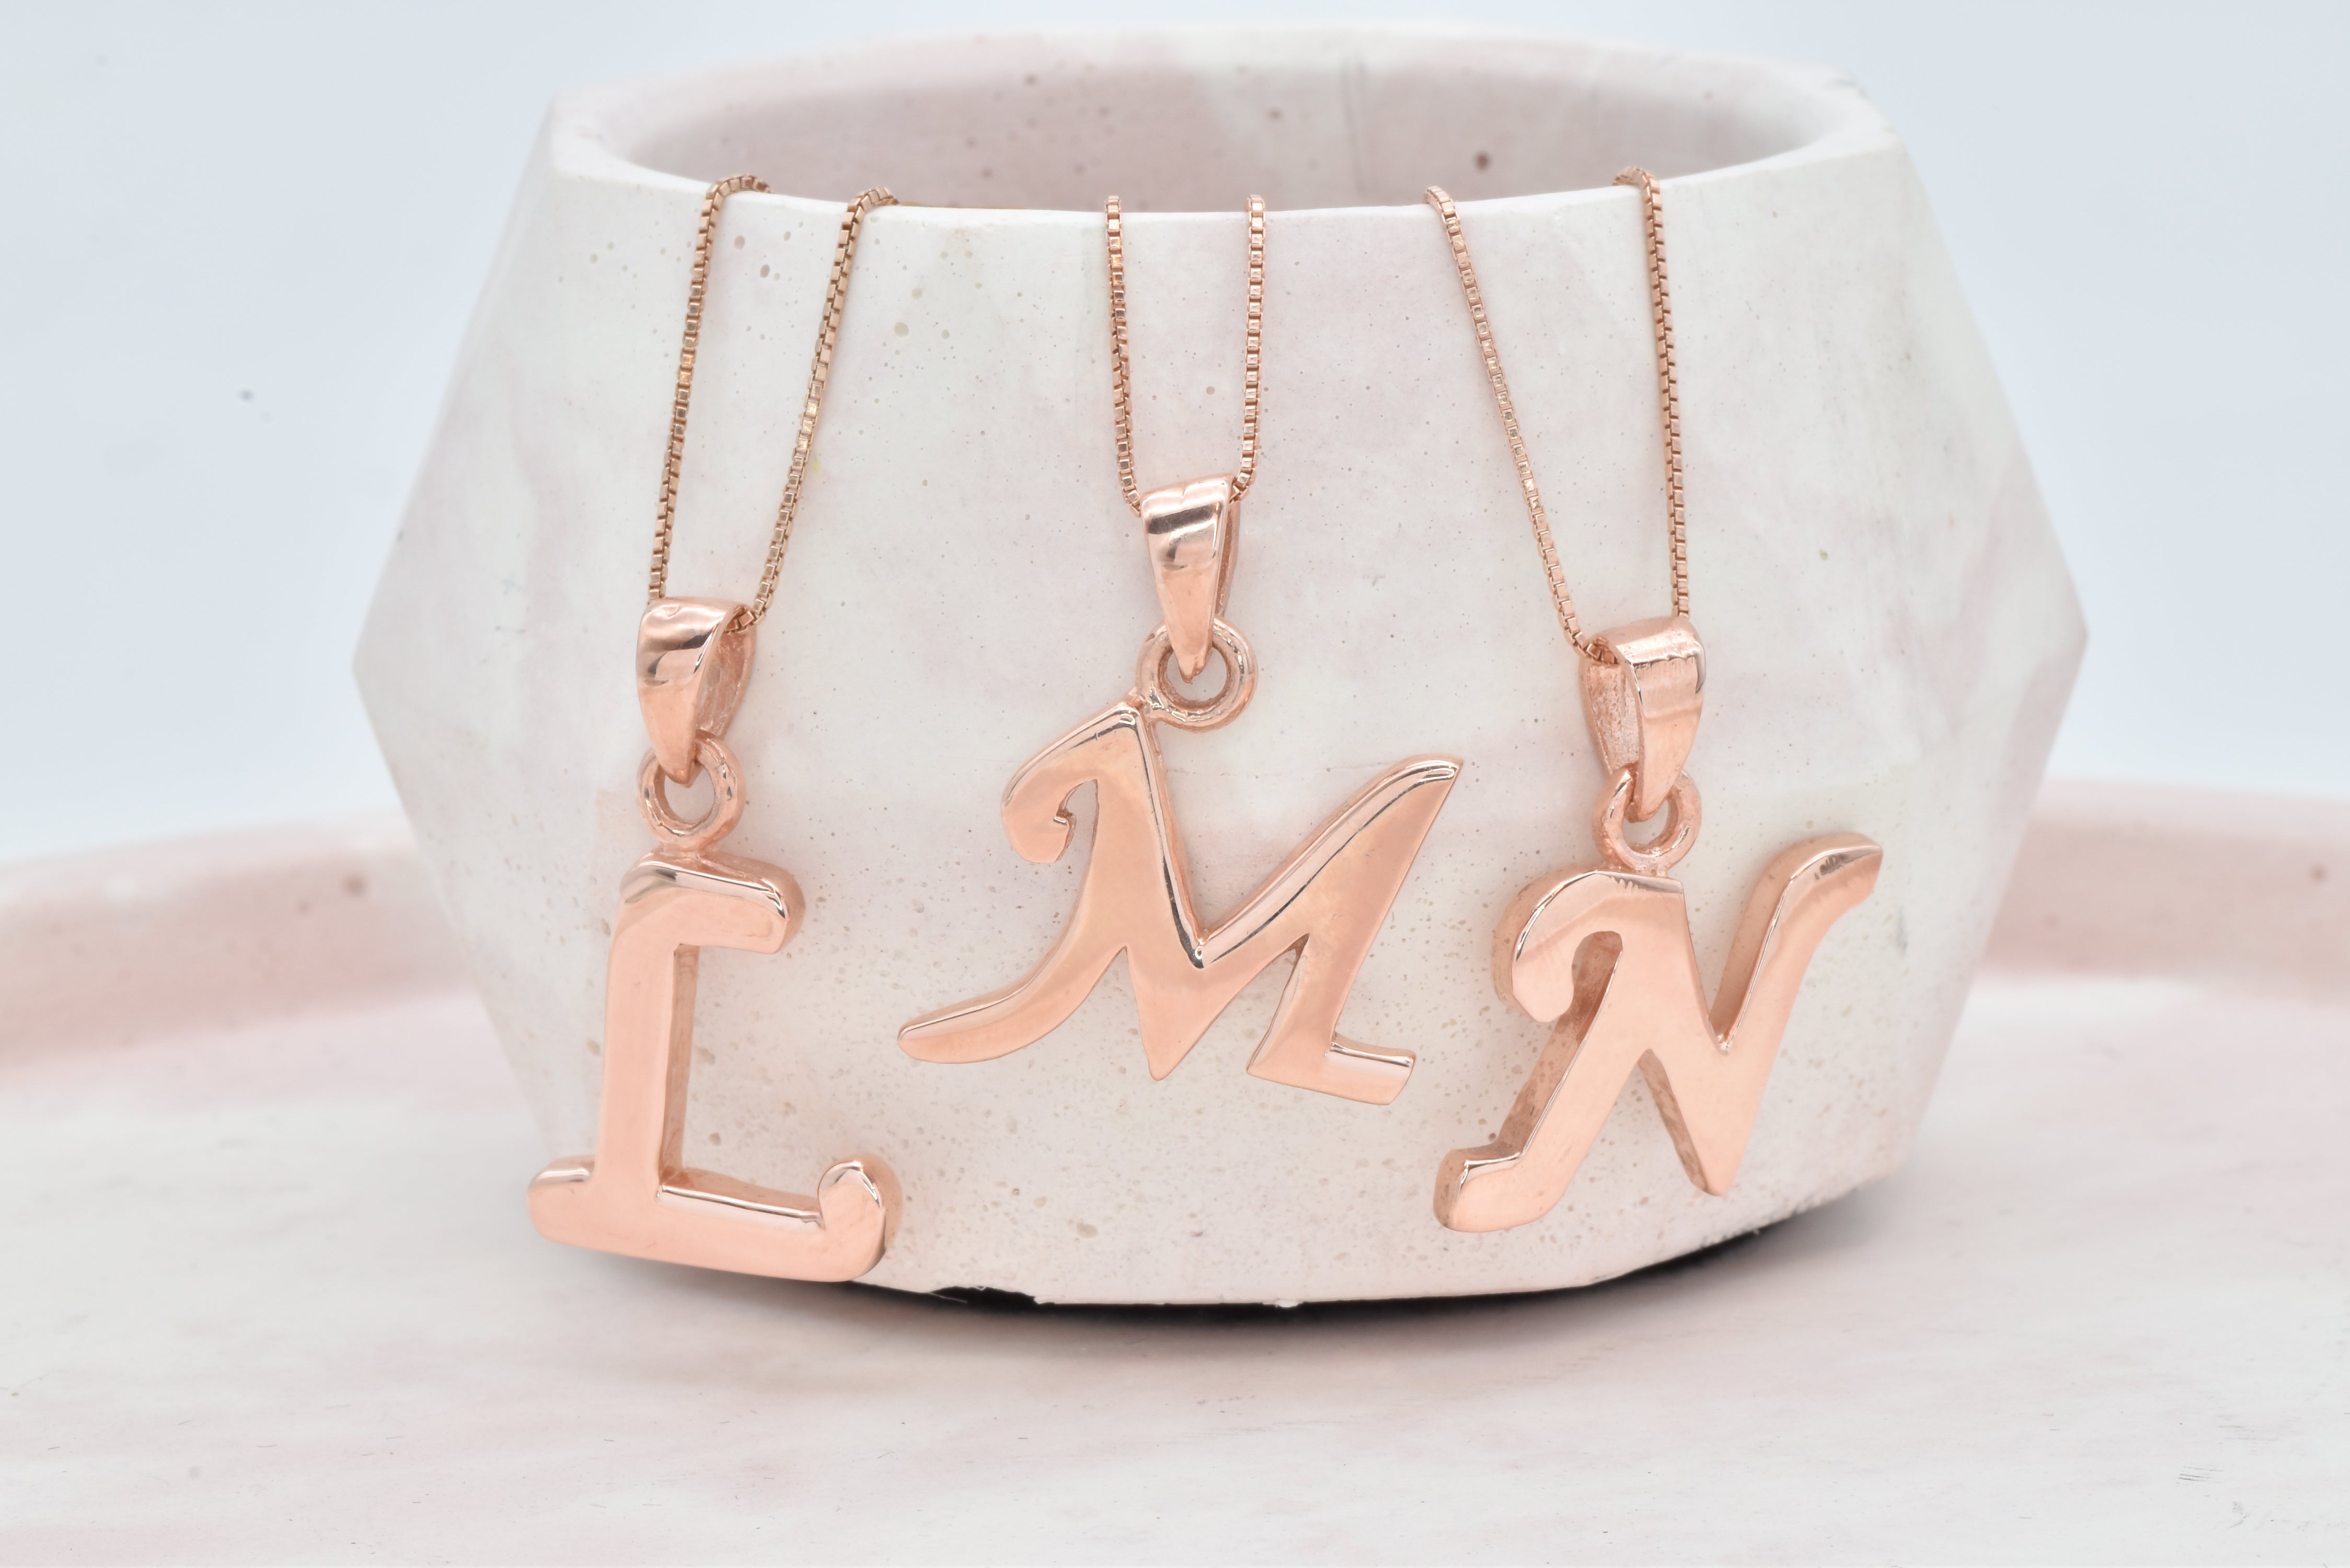 Rose Gold Letter Pendant, Rose Gold Initial Pendant, Letter Pendant, Initial Pendant, Letter Necklace, Initial Necklace,Gift For Her